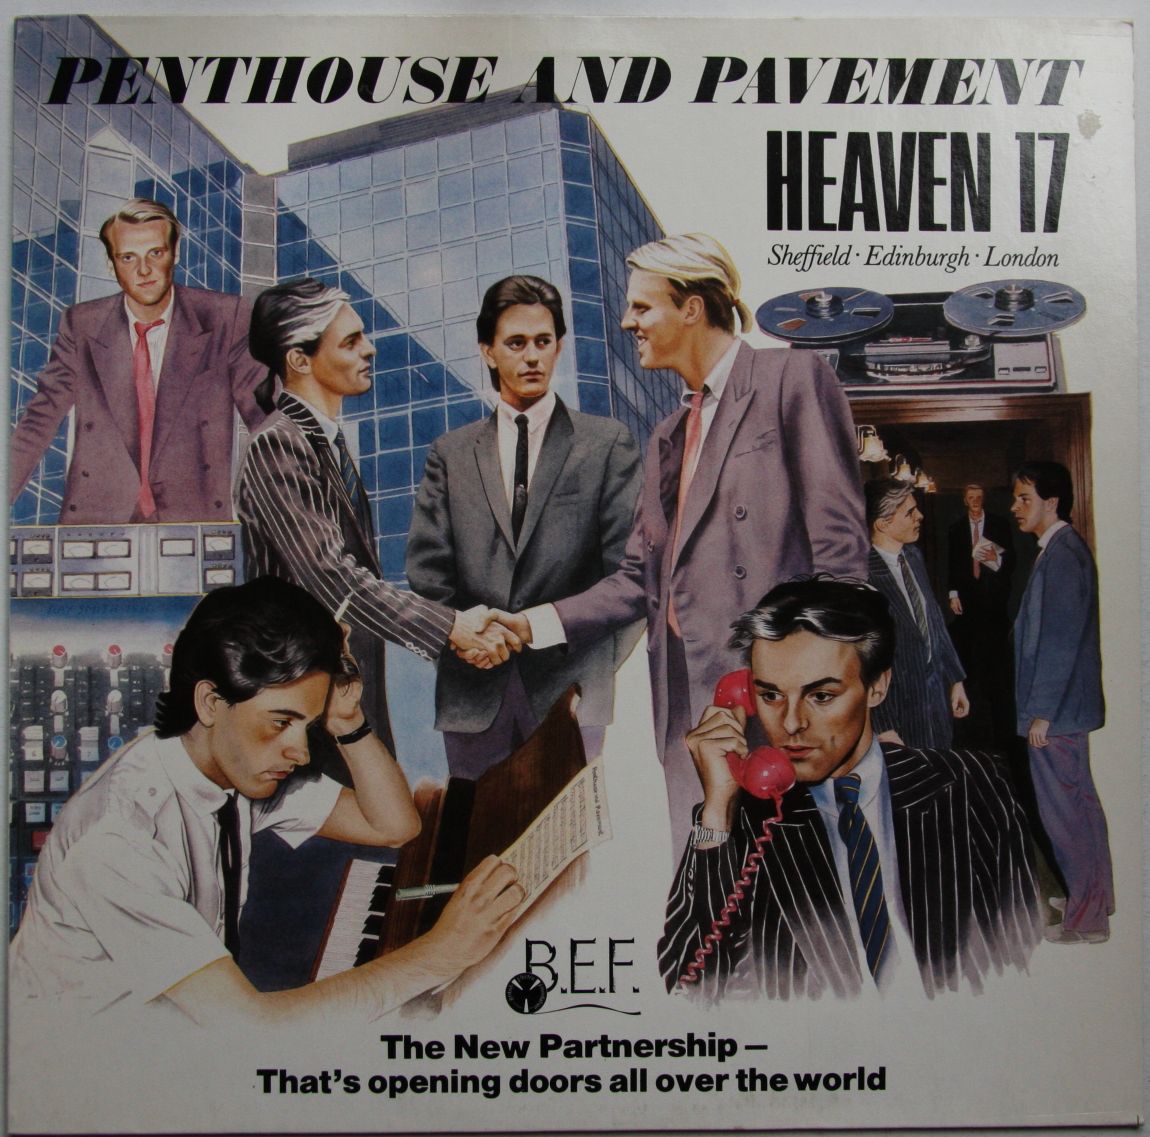 Heaven 17  - Penthouse and Pavement